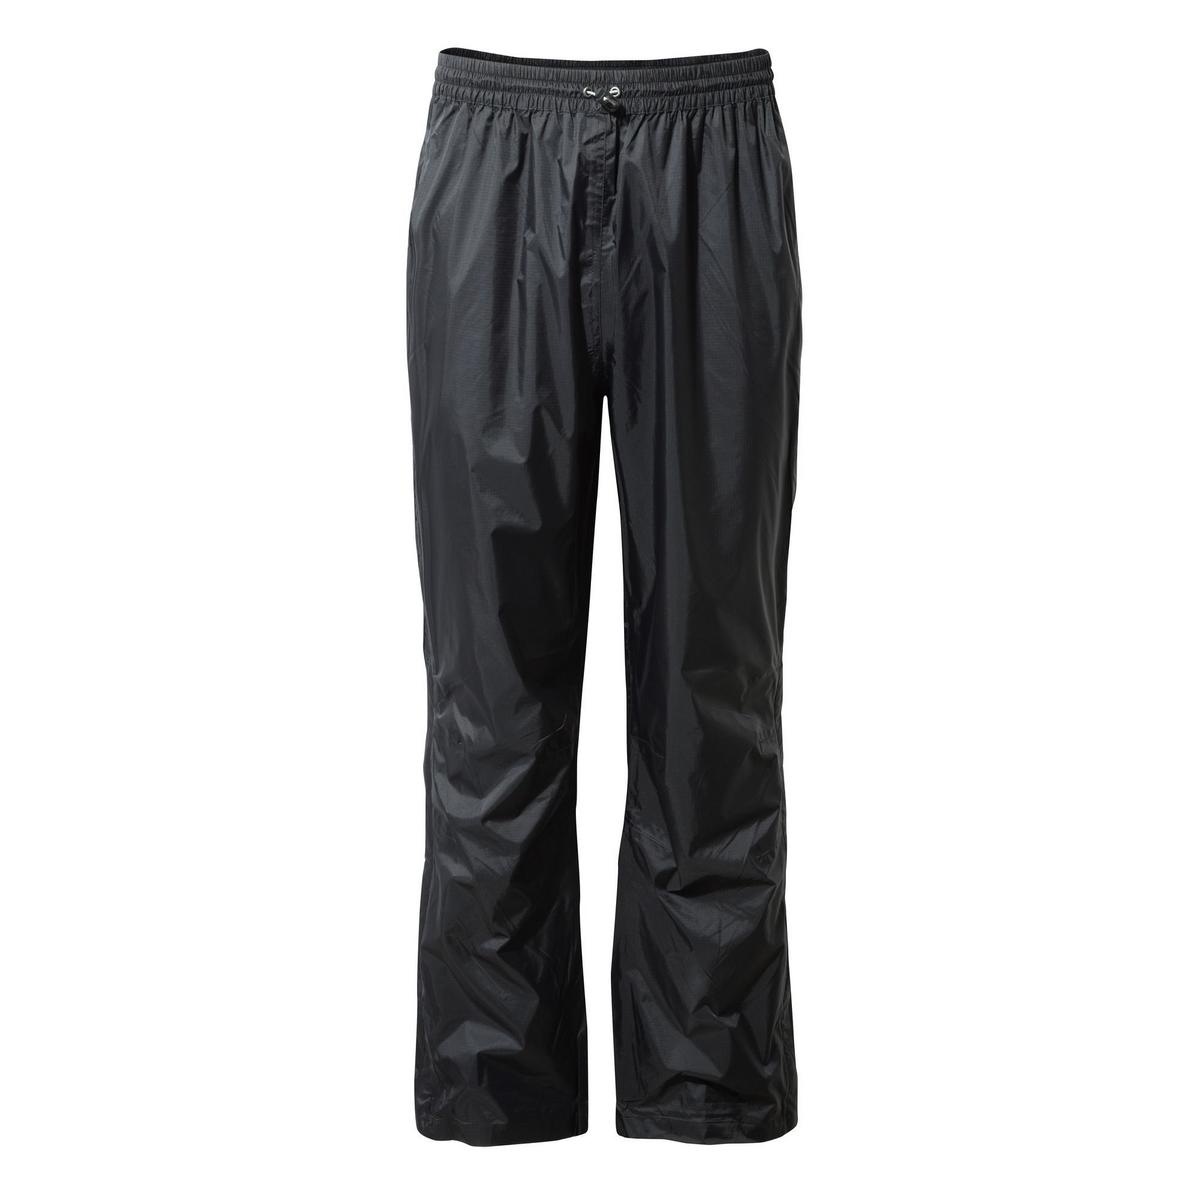 Craghoppers Ascent Overtrousers - Black